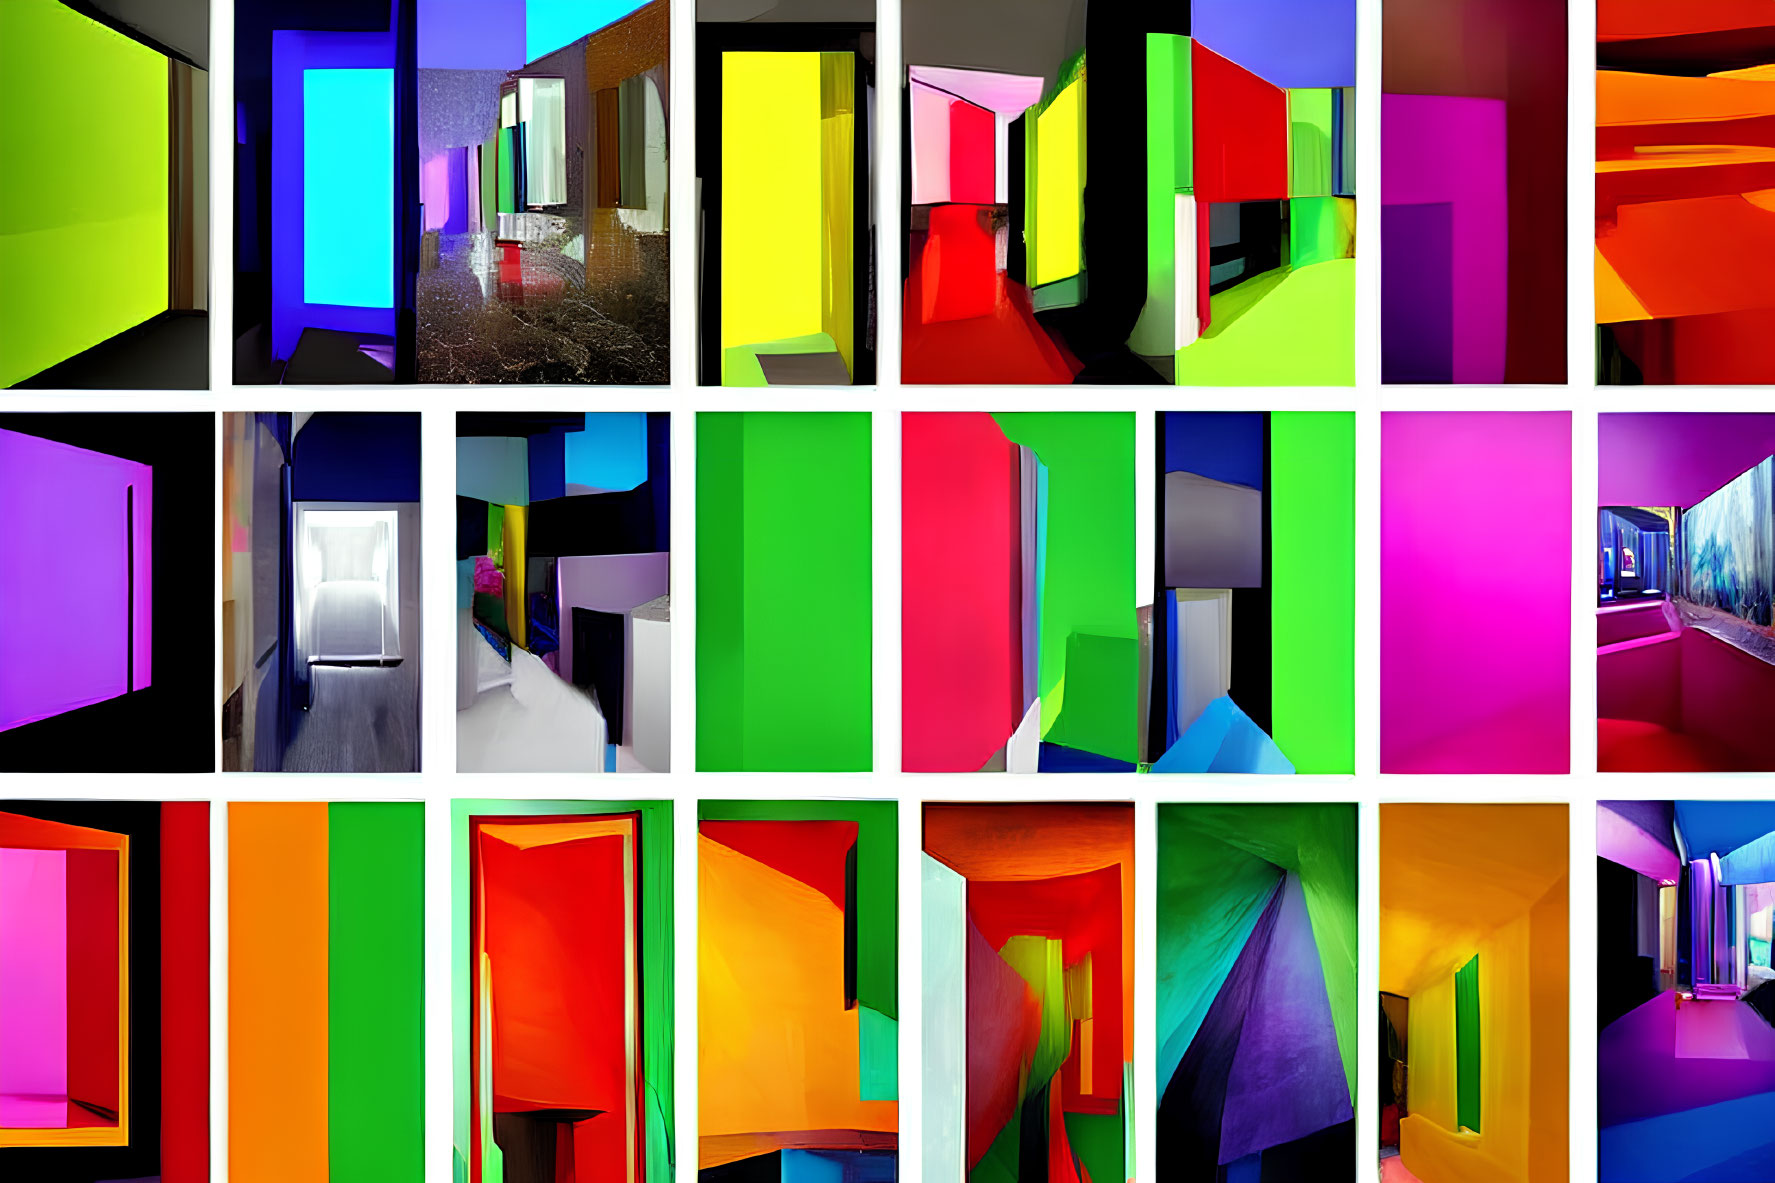 Colorful Corridors and Doorways Collage Displaying Abstract Architectural Spaces